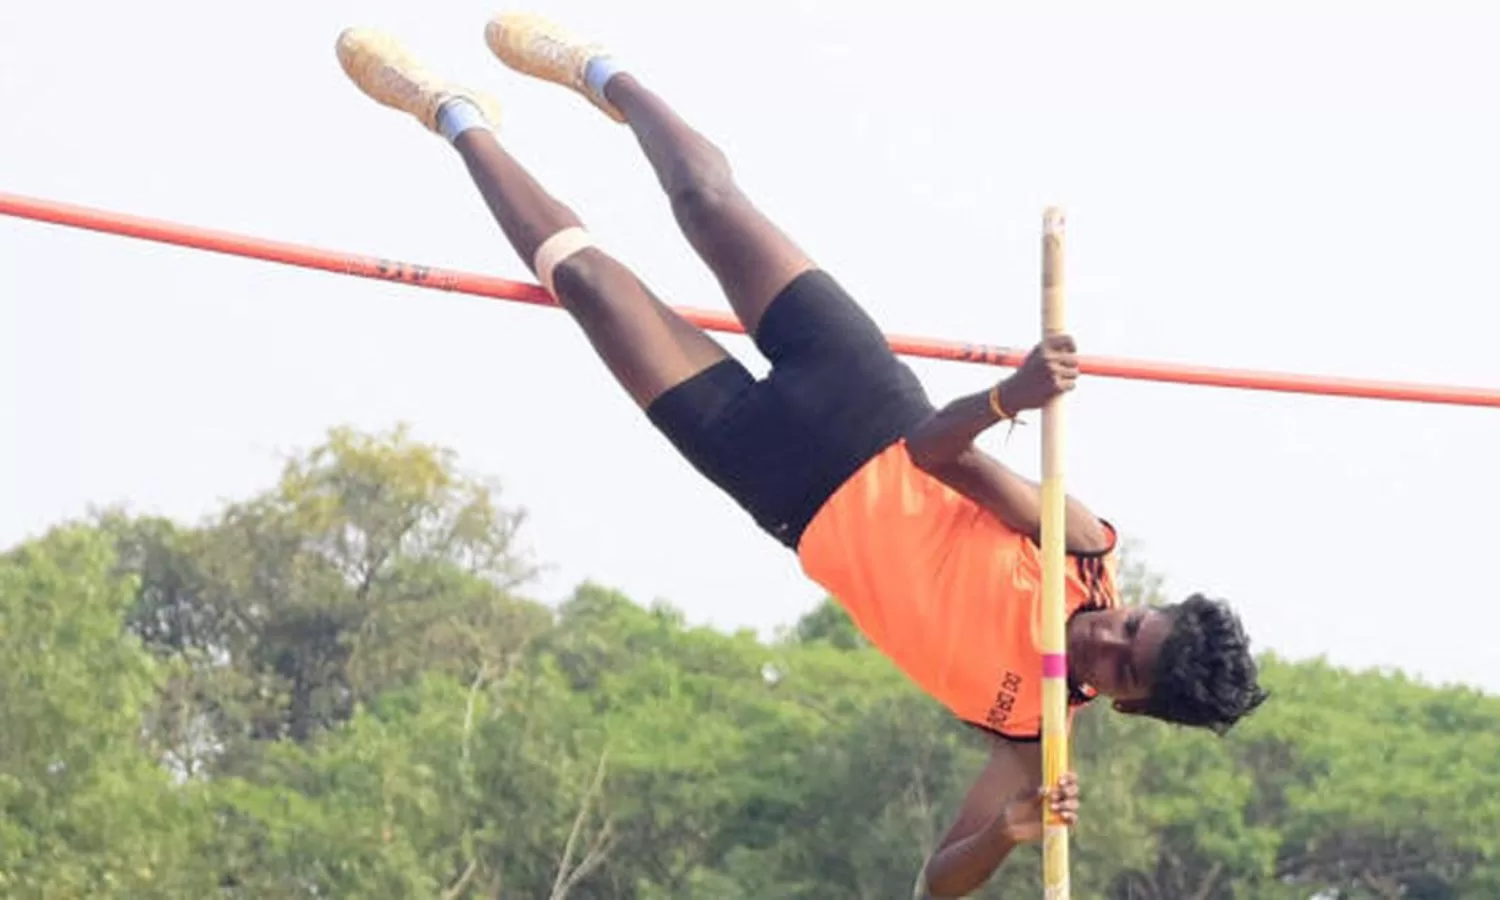 Pavithra Vengatesh clinches pole vault gold notching new personal record